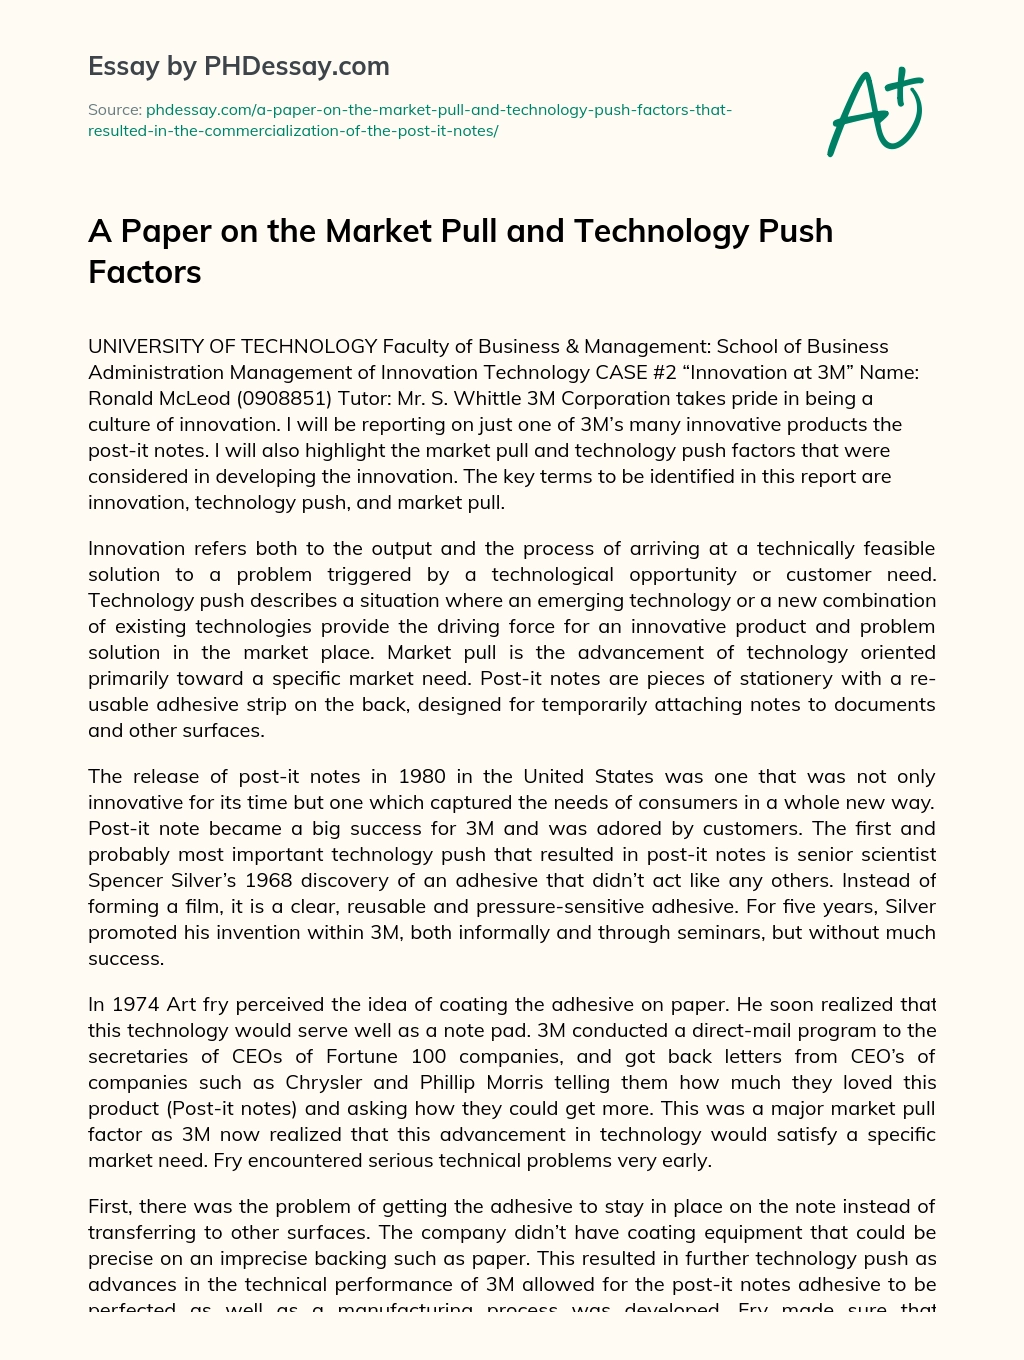 A Paper on the Market Pull and Technology Push Factors essay